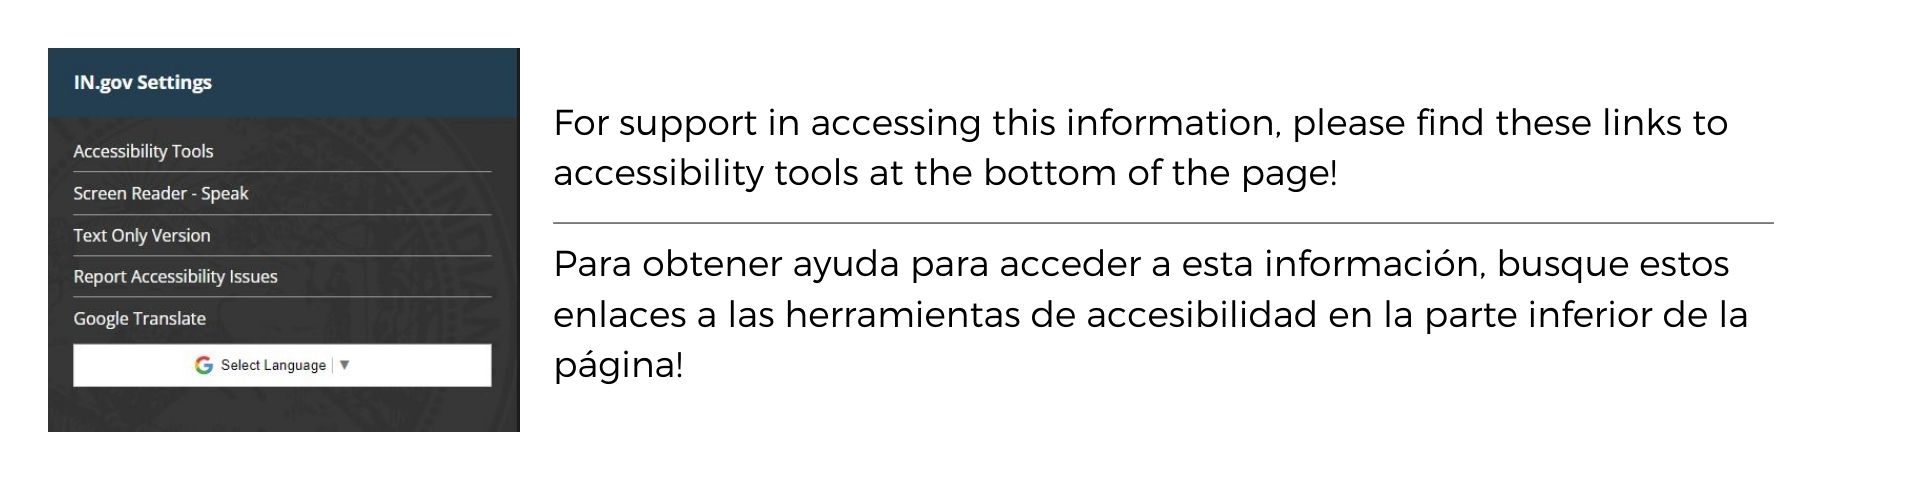 For support in accessing this information, please find these links to accessibility tools at the bottom of the page!